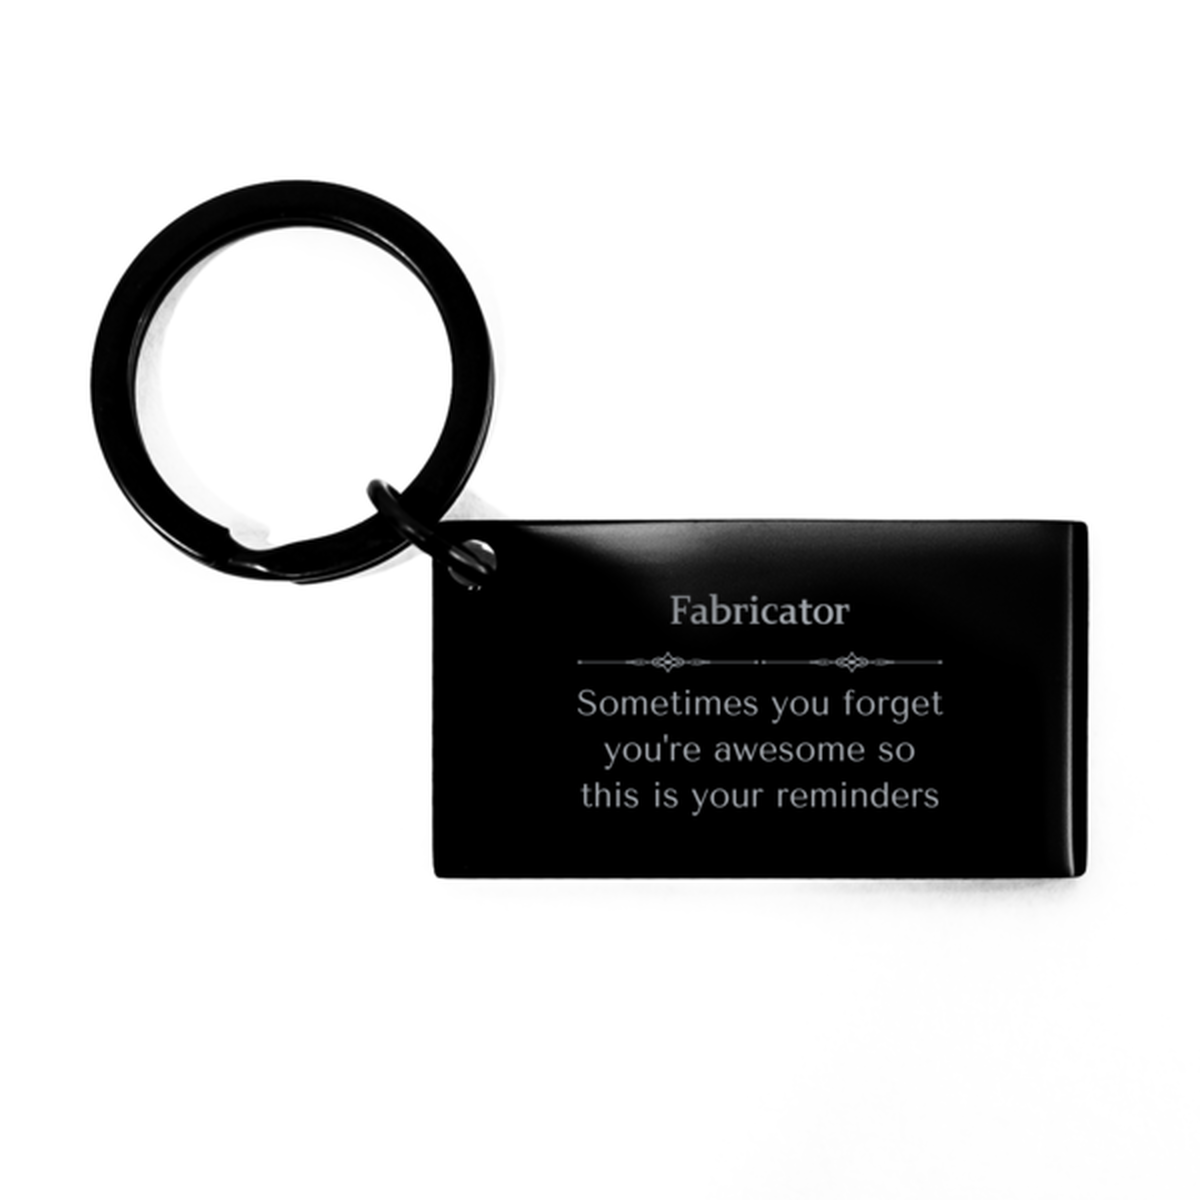 Sentimental Fabricator Keychain, Landscape Architect Sometimes you forget you're awesome so this is your reminders, Graduation Christmas Birthday Gifts for Fabricator, Men, Women, Coworkers